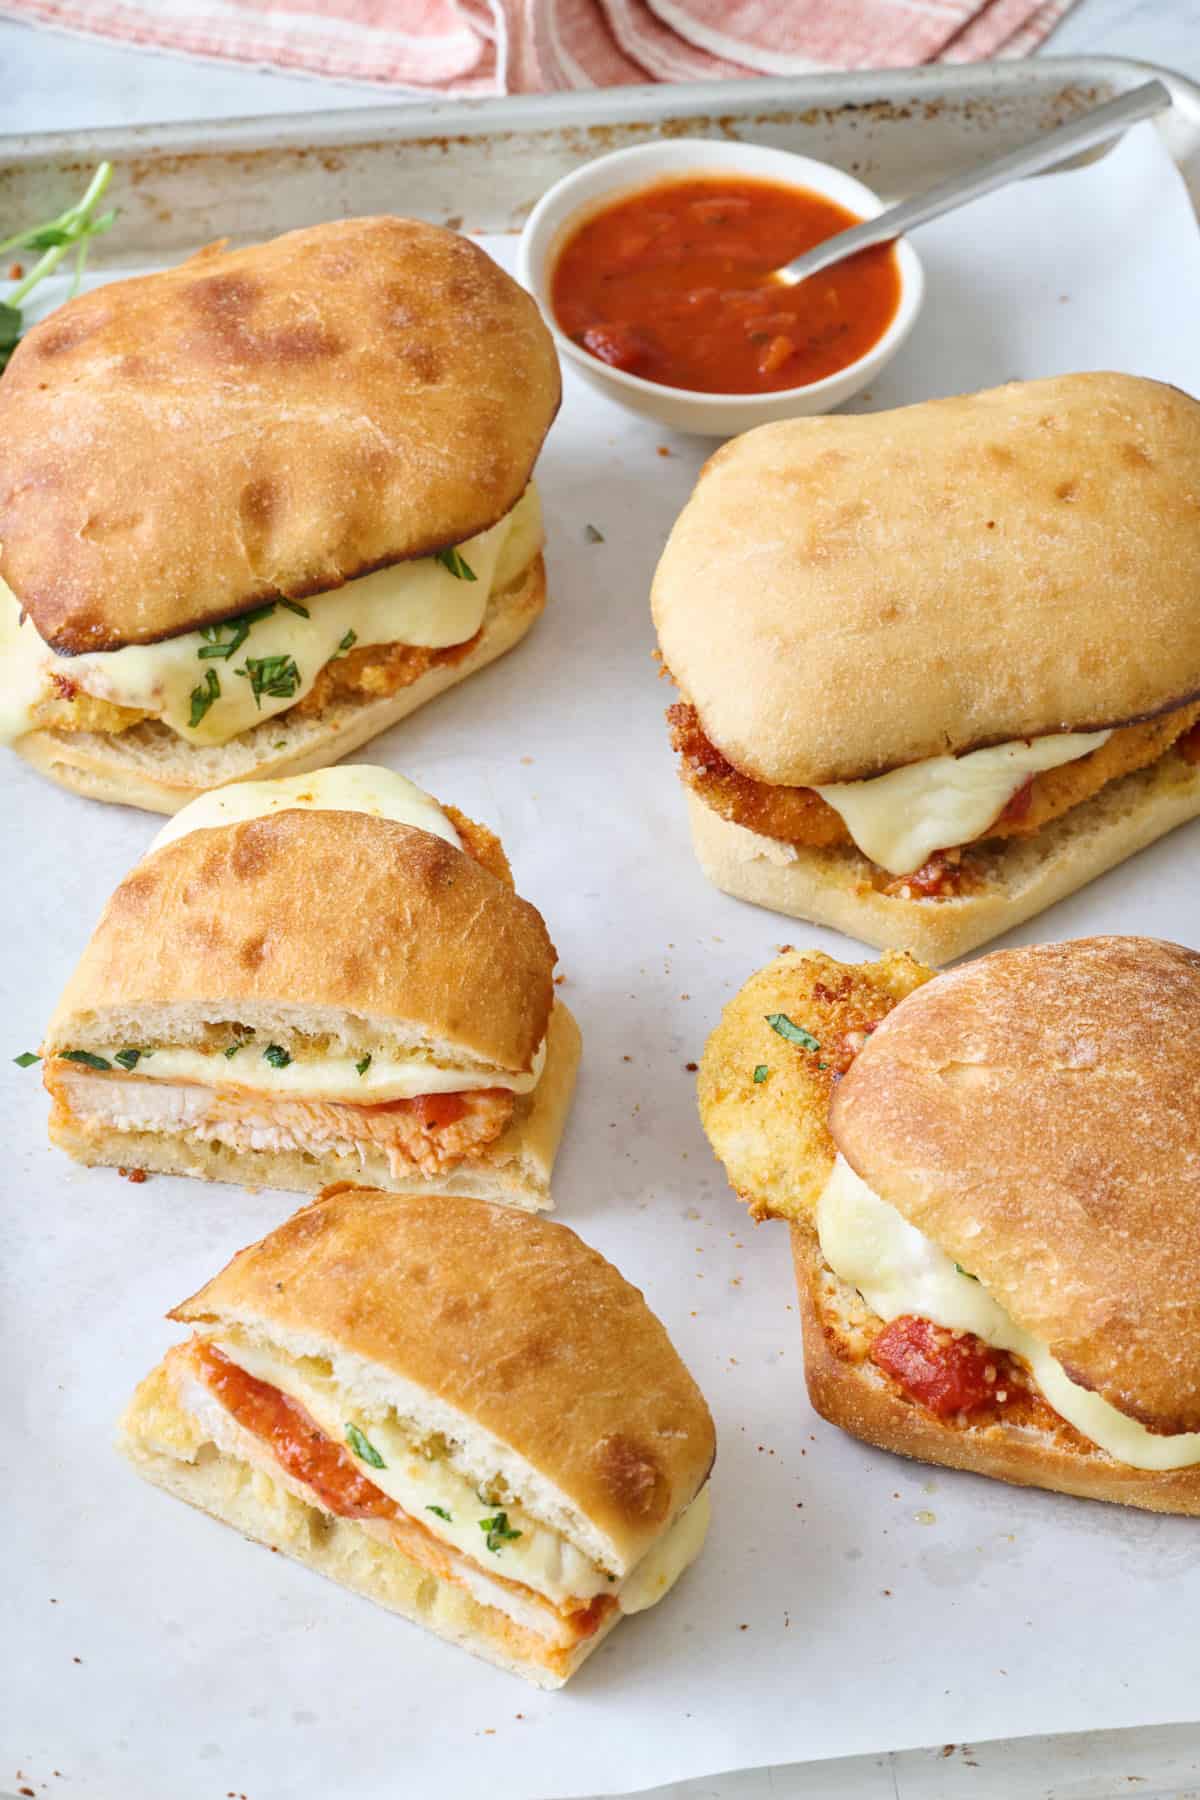 Chicken parm sandwiches on a parchment-lined baking sheet with a small bowl of marinara.